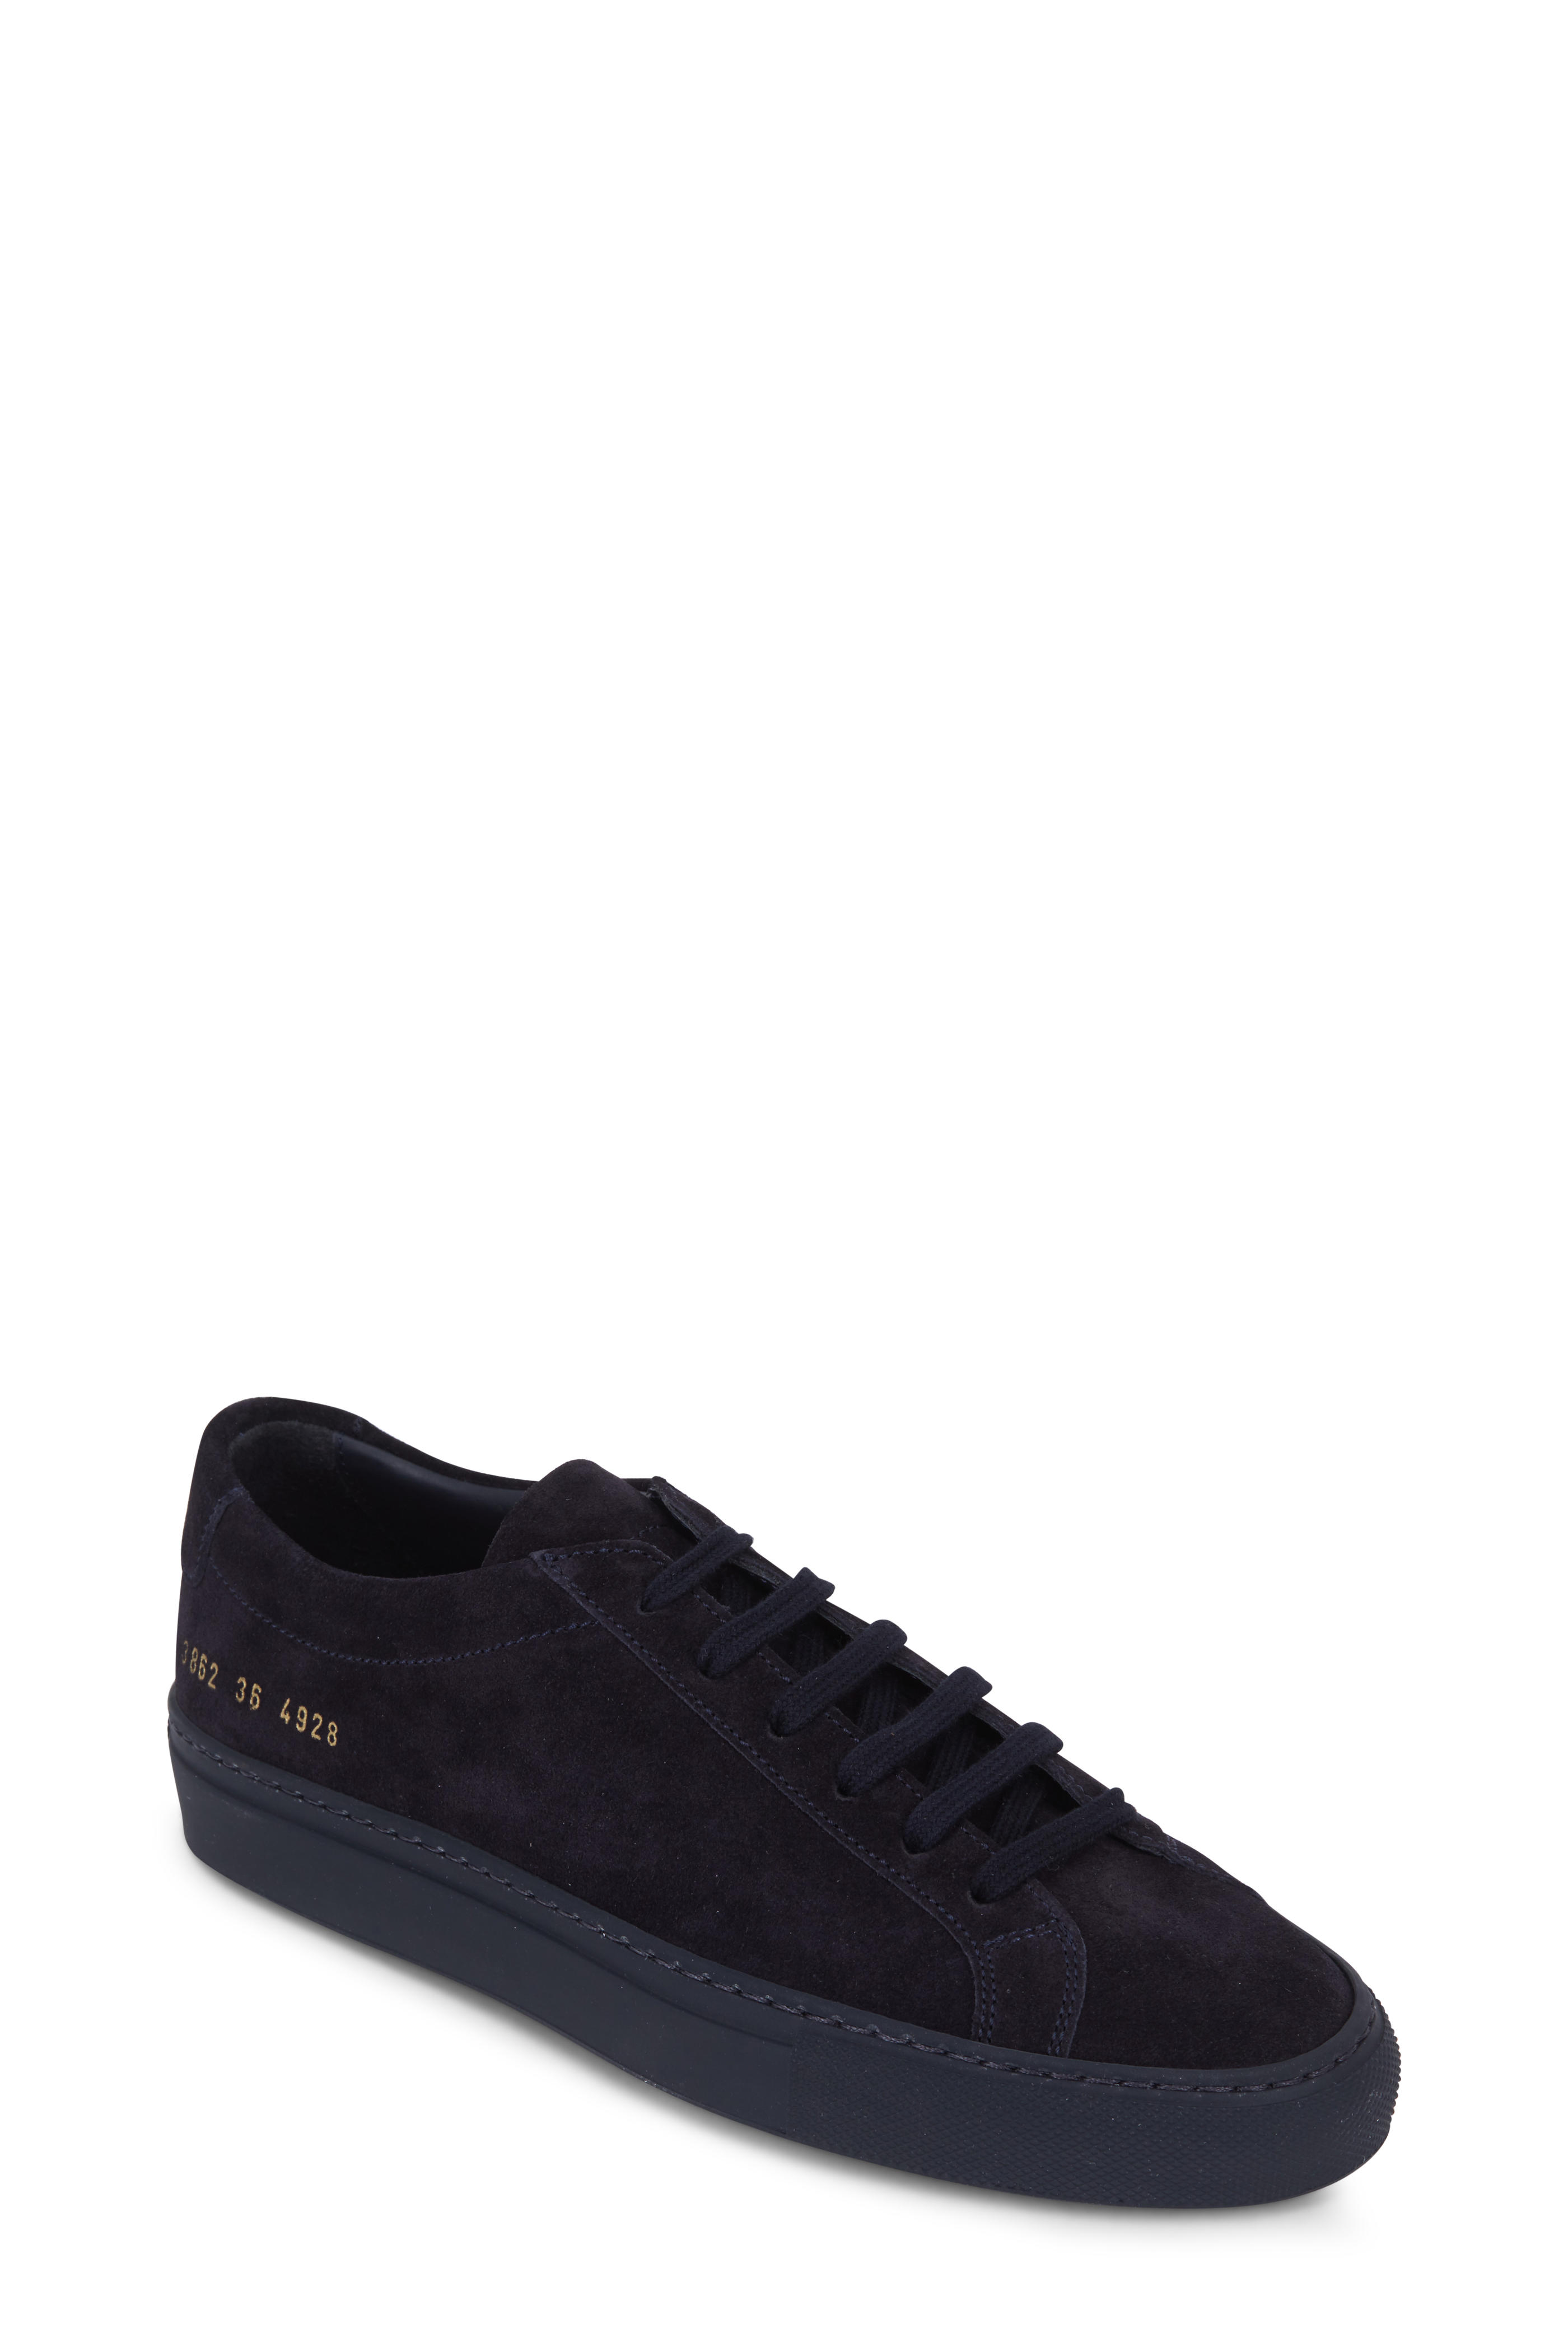 common projects women's black